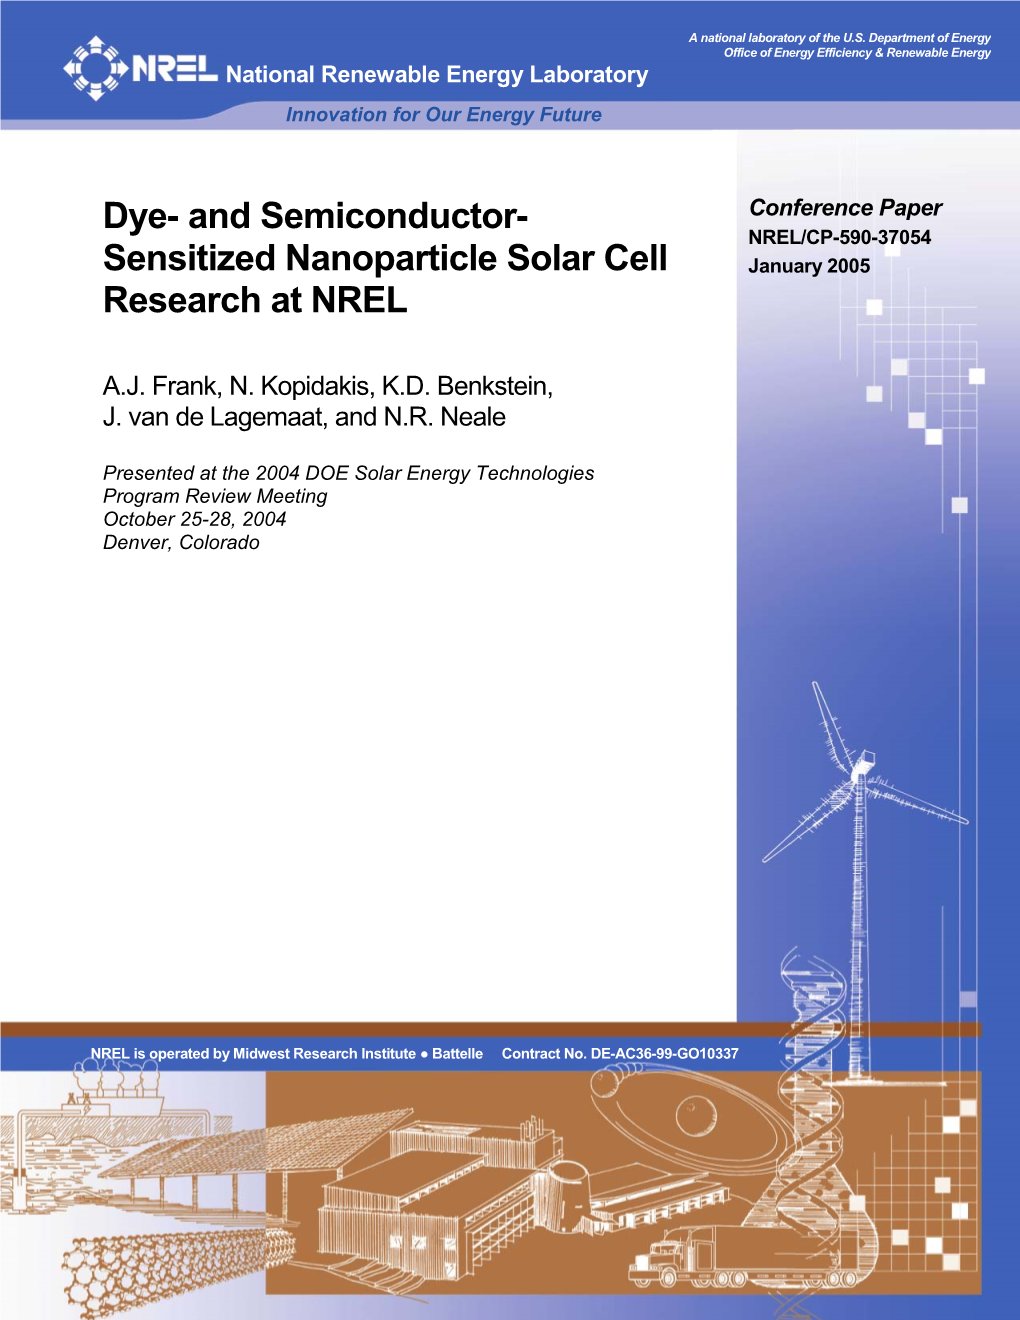 Dye- and Semiconductor-Sensitized Nanoparticle Solar Cell Research at NREL